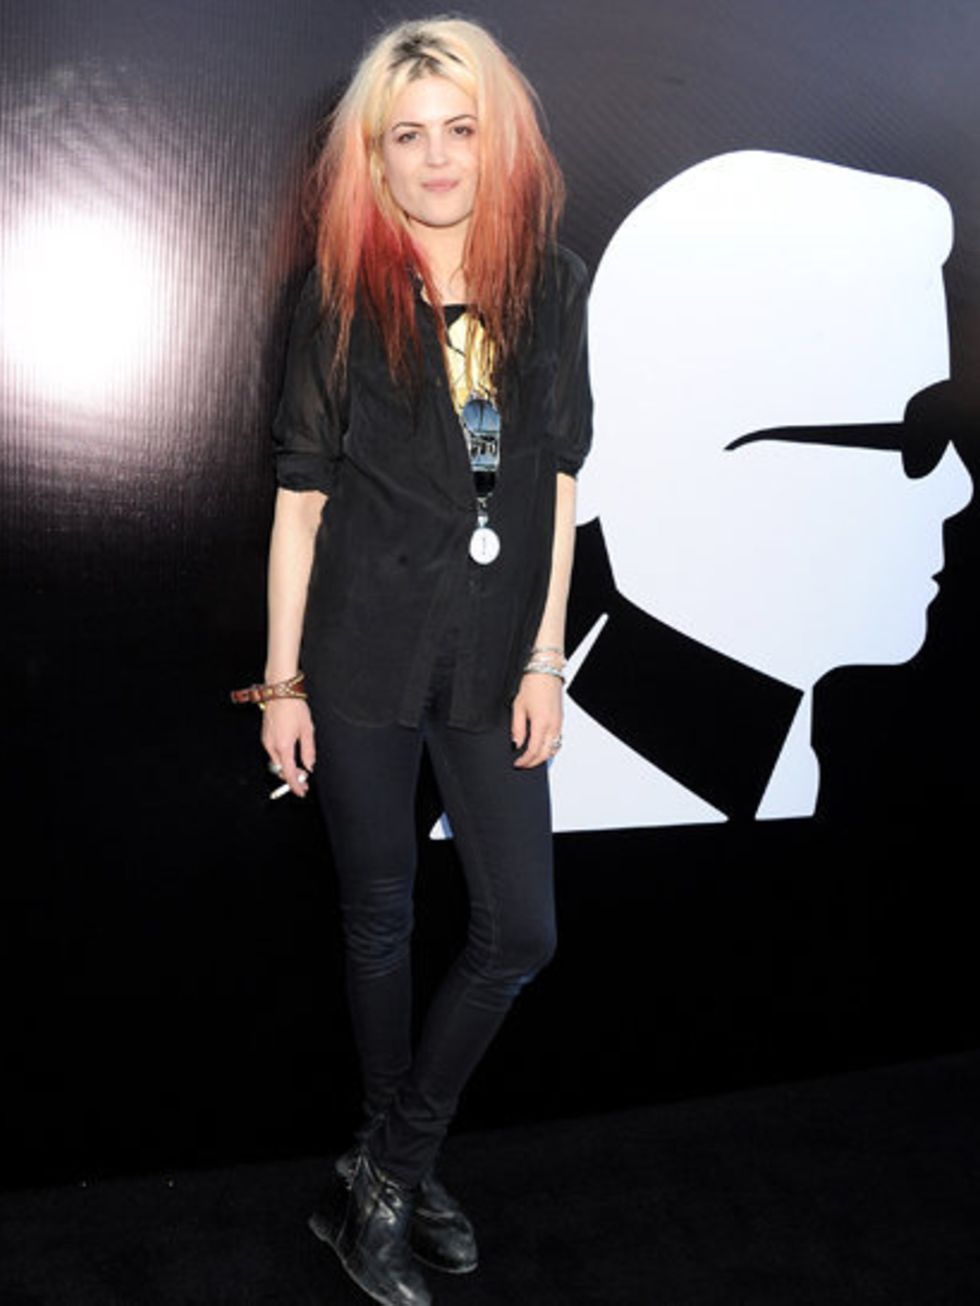 <p>Alison Mosshart DJd at the launch party on Selfridges' roof</p>